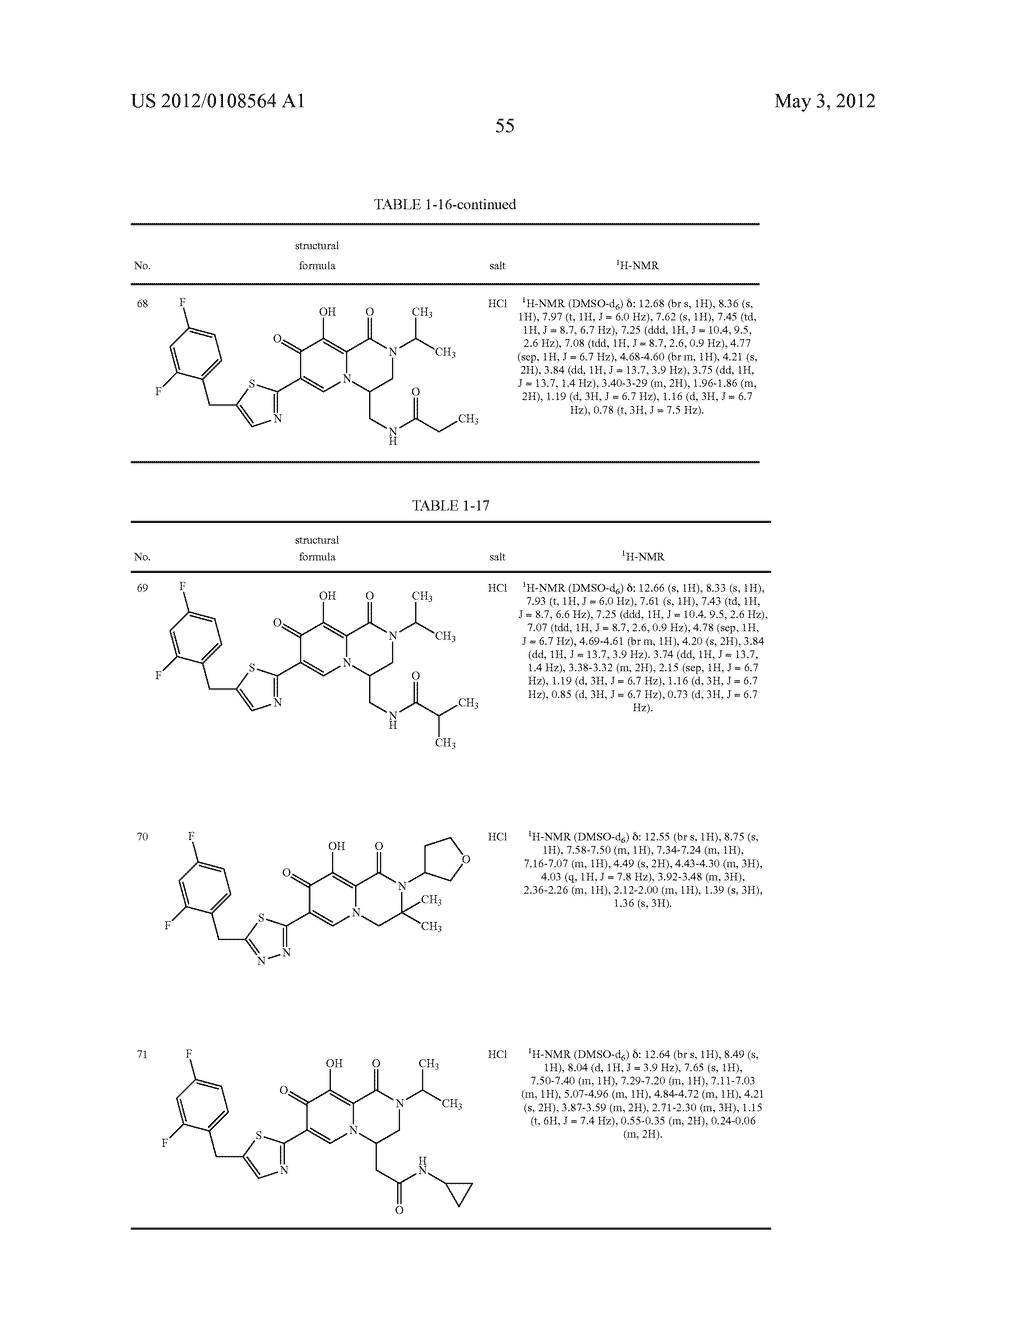 1,3,4,8-Tetrahydro-2H-Pyrido[1,2-a]Pyradine Derivatives and Use Thereof as     HIV Integrase Inhibitor - diagram, schematic, and image 56